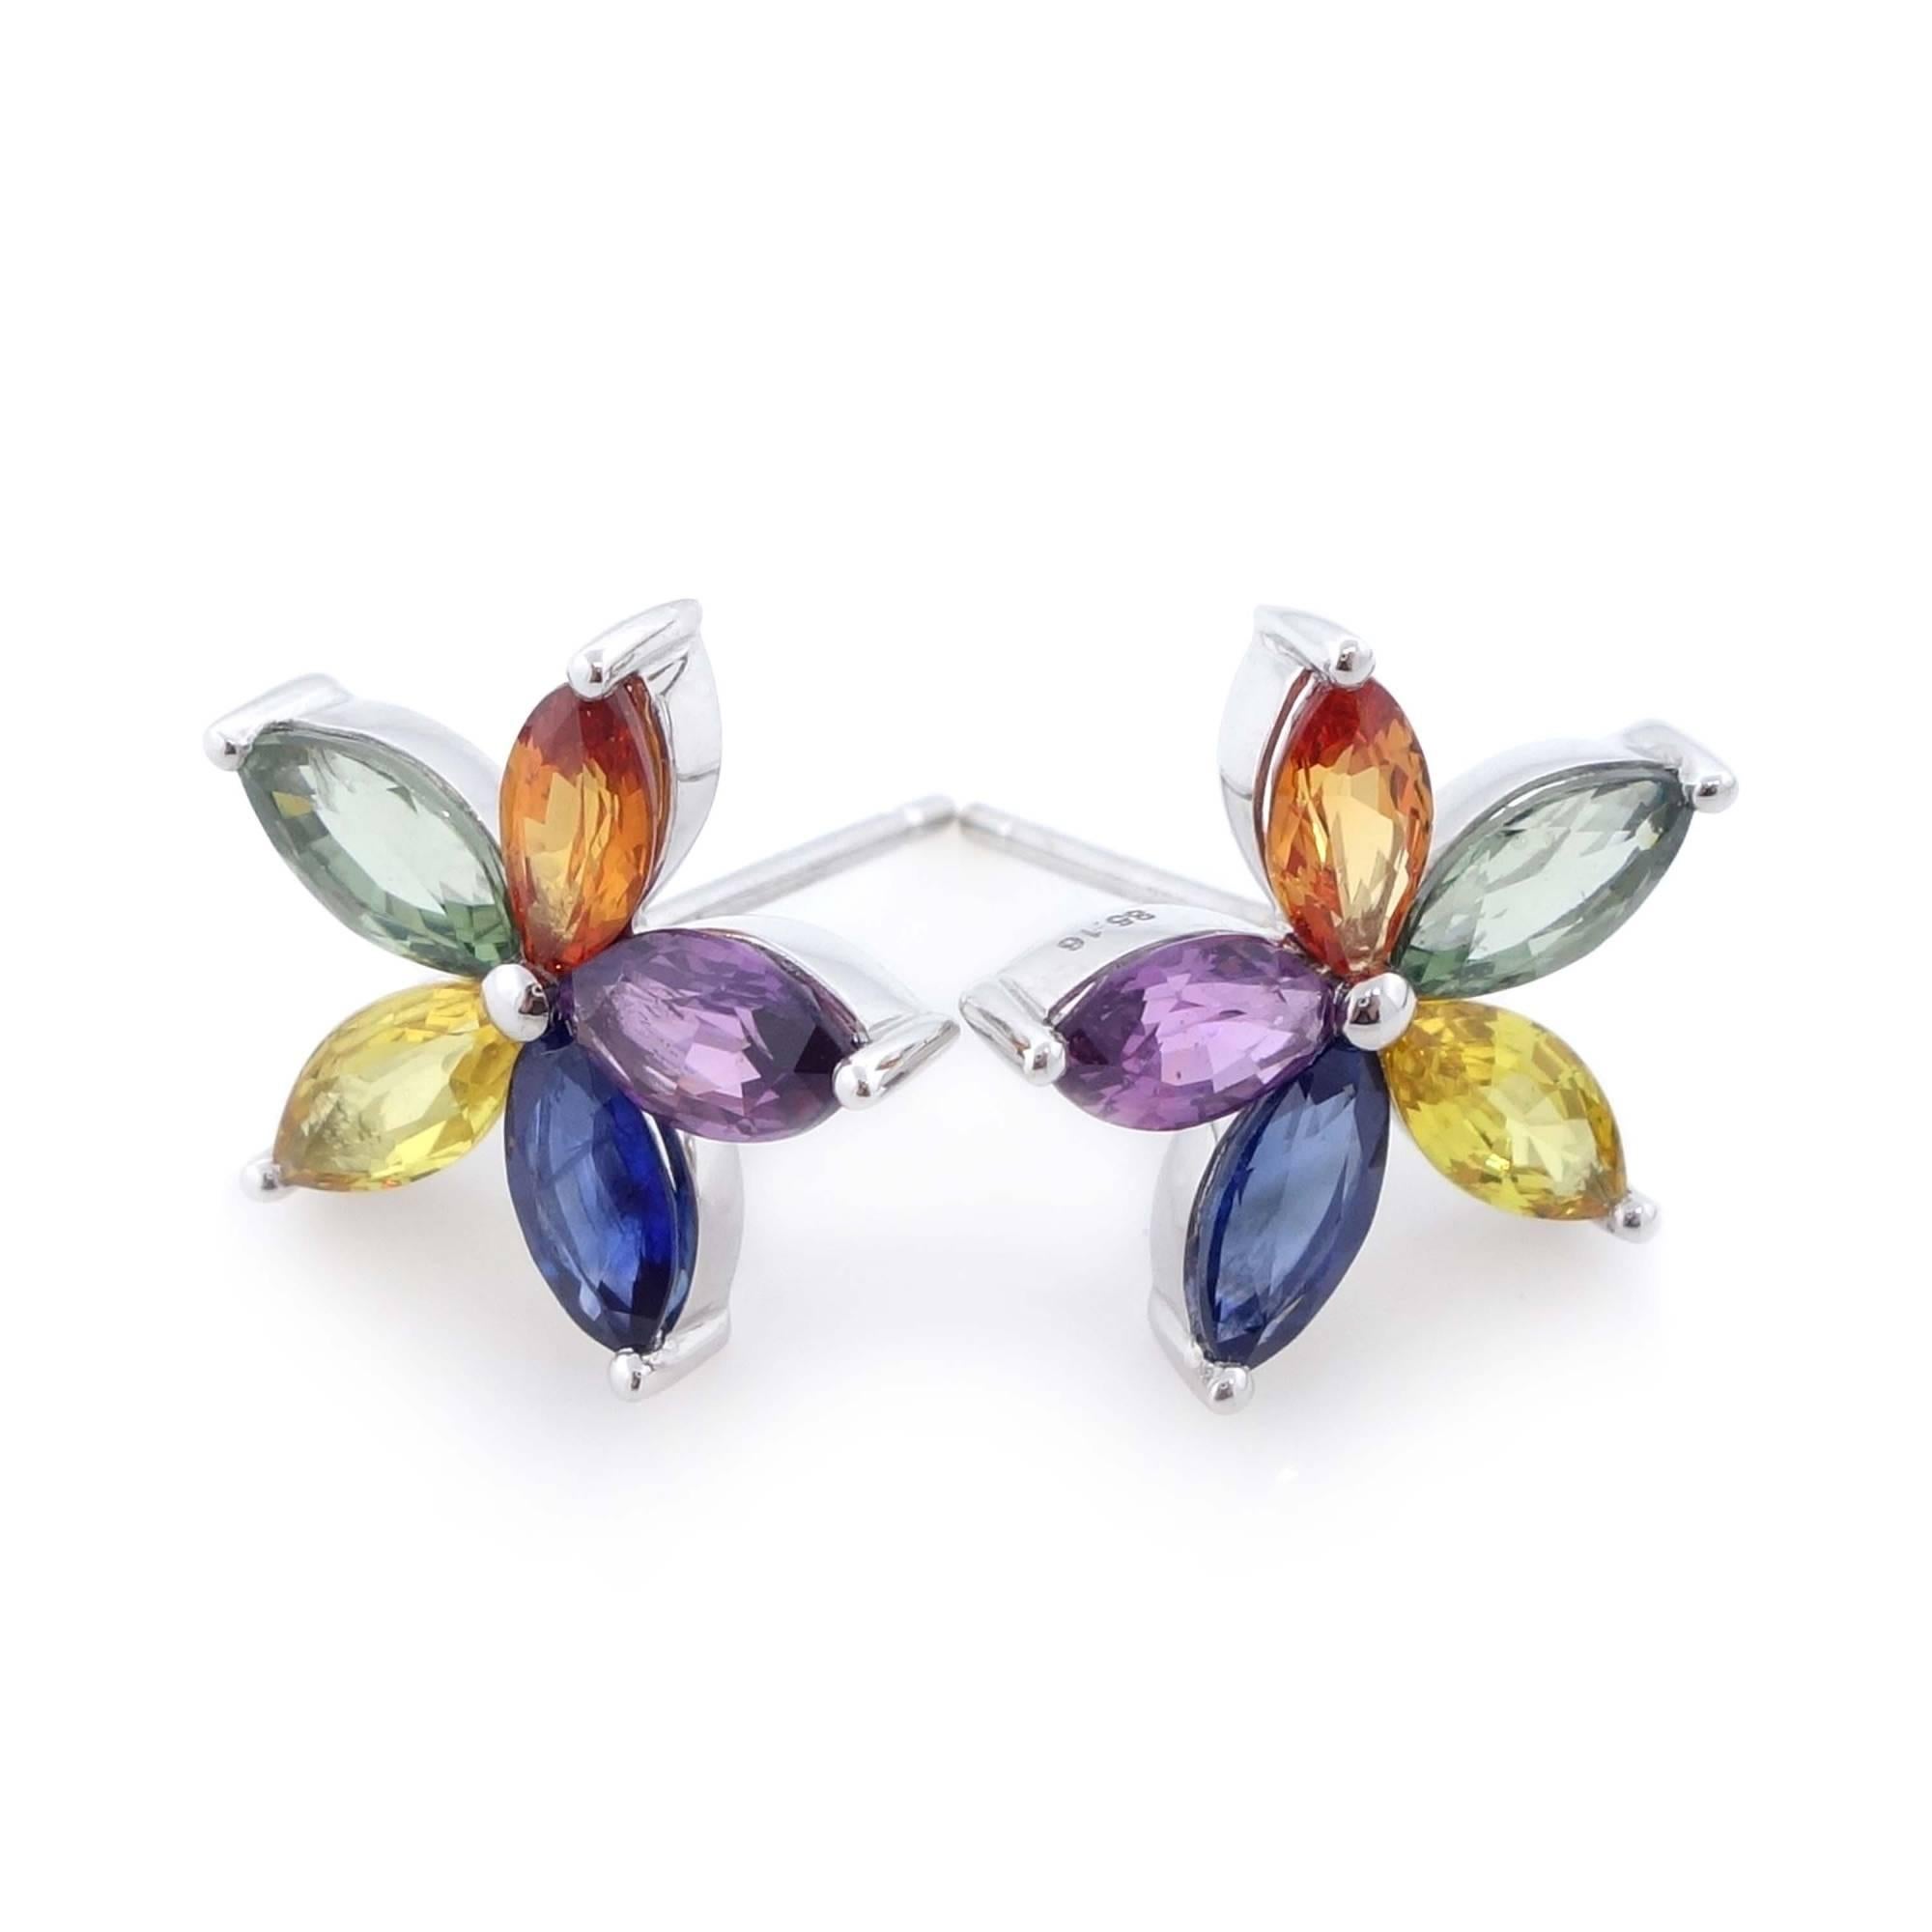 10 fine colorful marquise sapphires of about 5.16 carats. All sapphires are set in an 18k white gold earrings. 
Measurements: W 0.65 x H 0.65 inch
